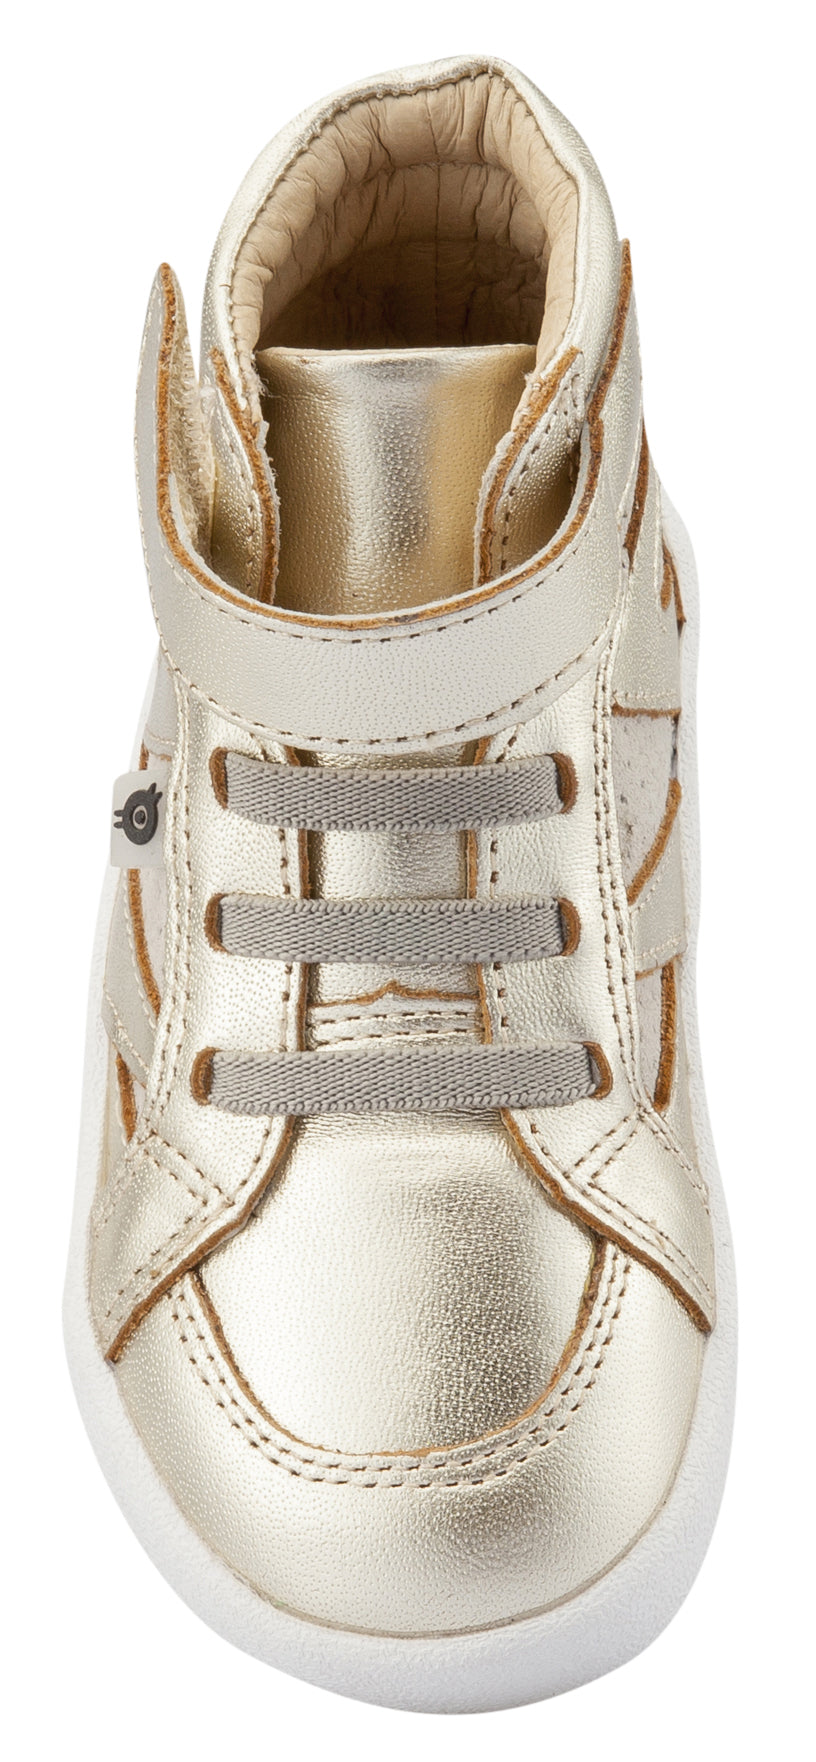 Old Soles Girl's & Boy's New Leader Sneakers, Gold / Grey Suede